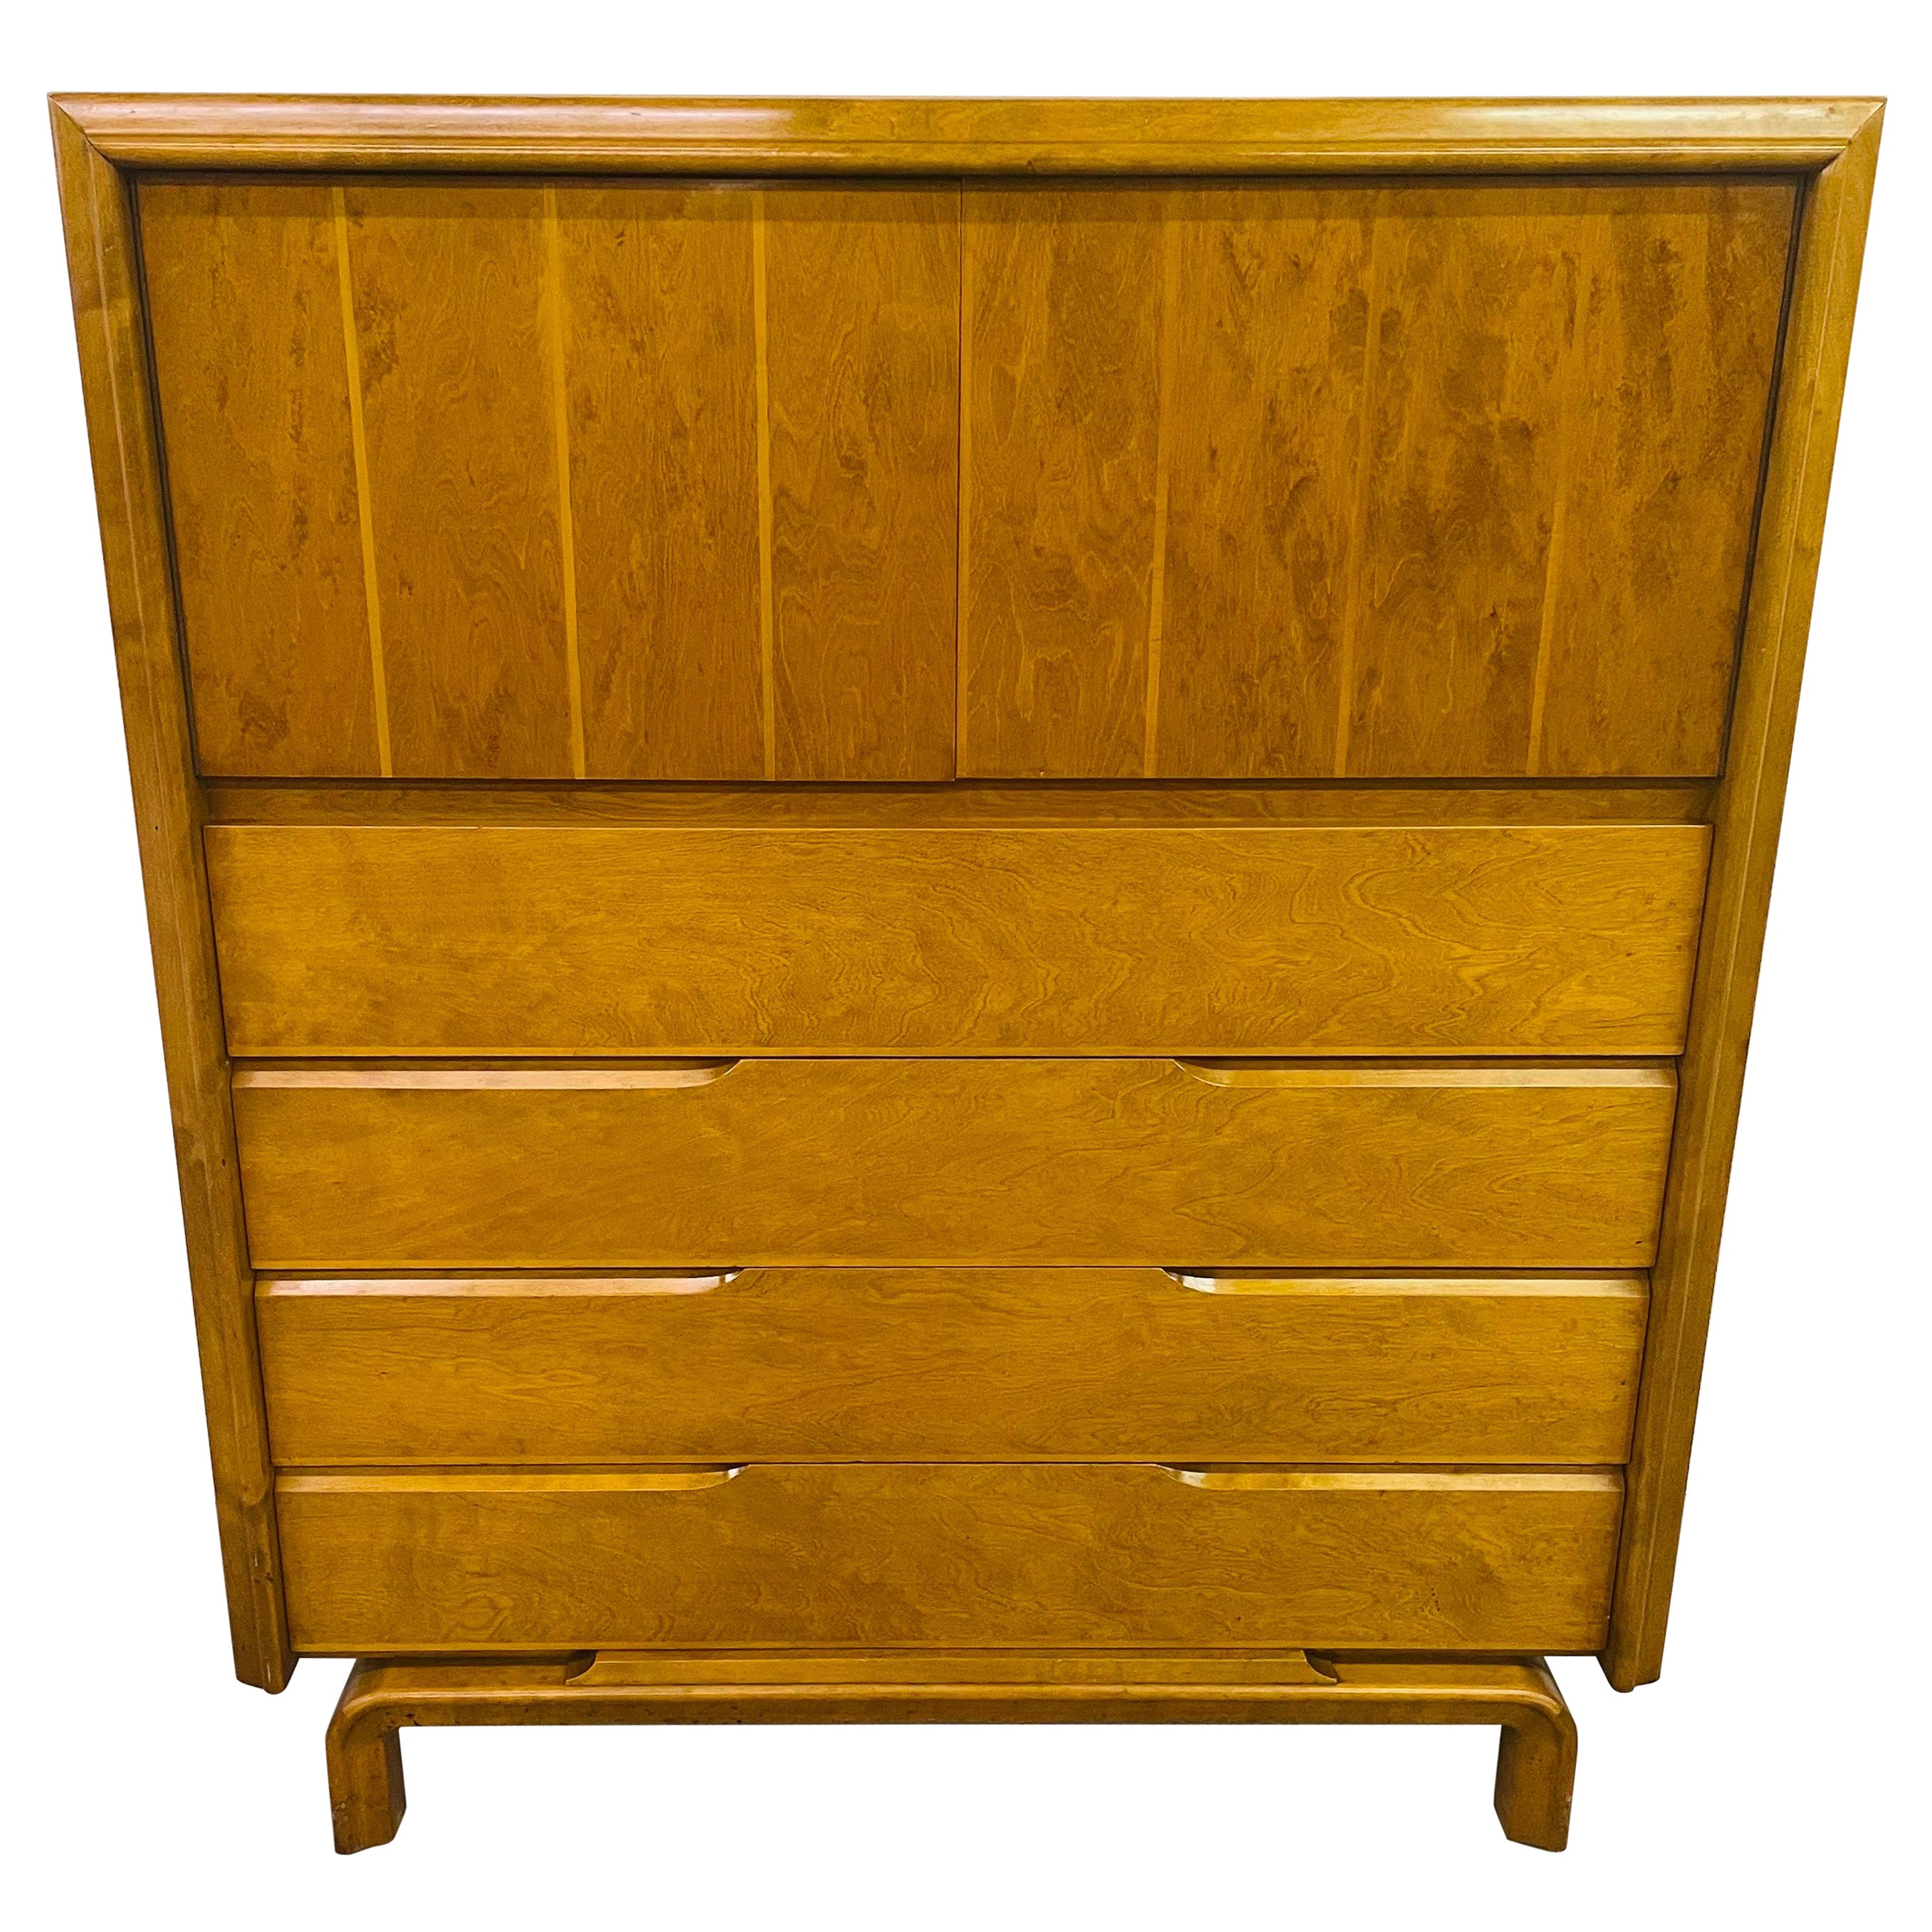 Mid-Century Edmond Spence Champagne High Chest